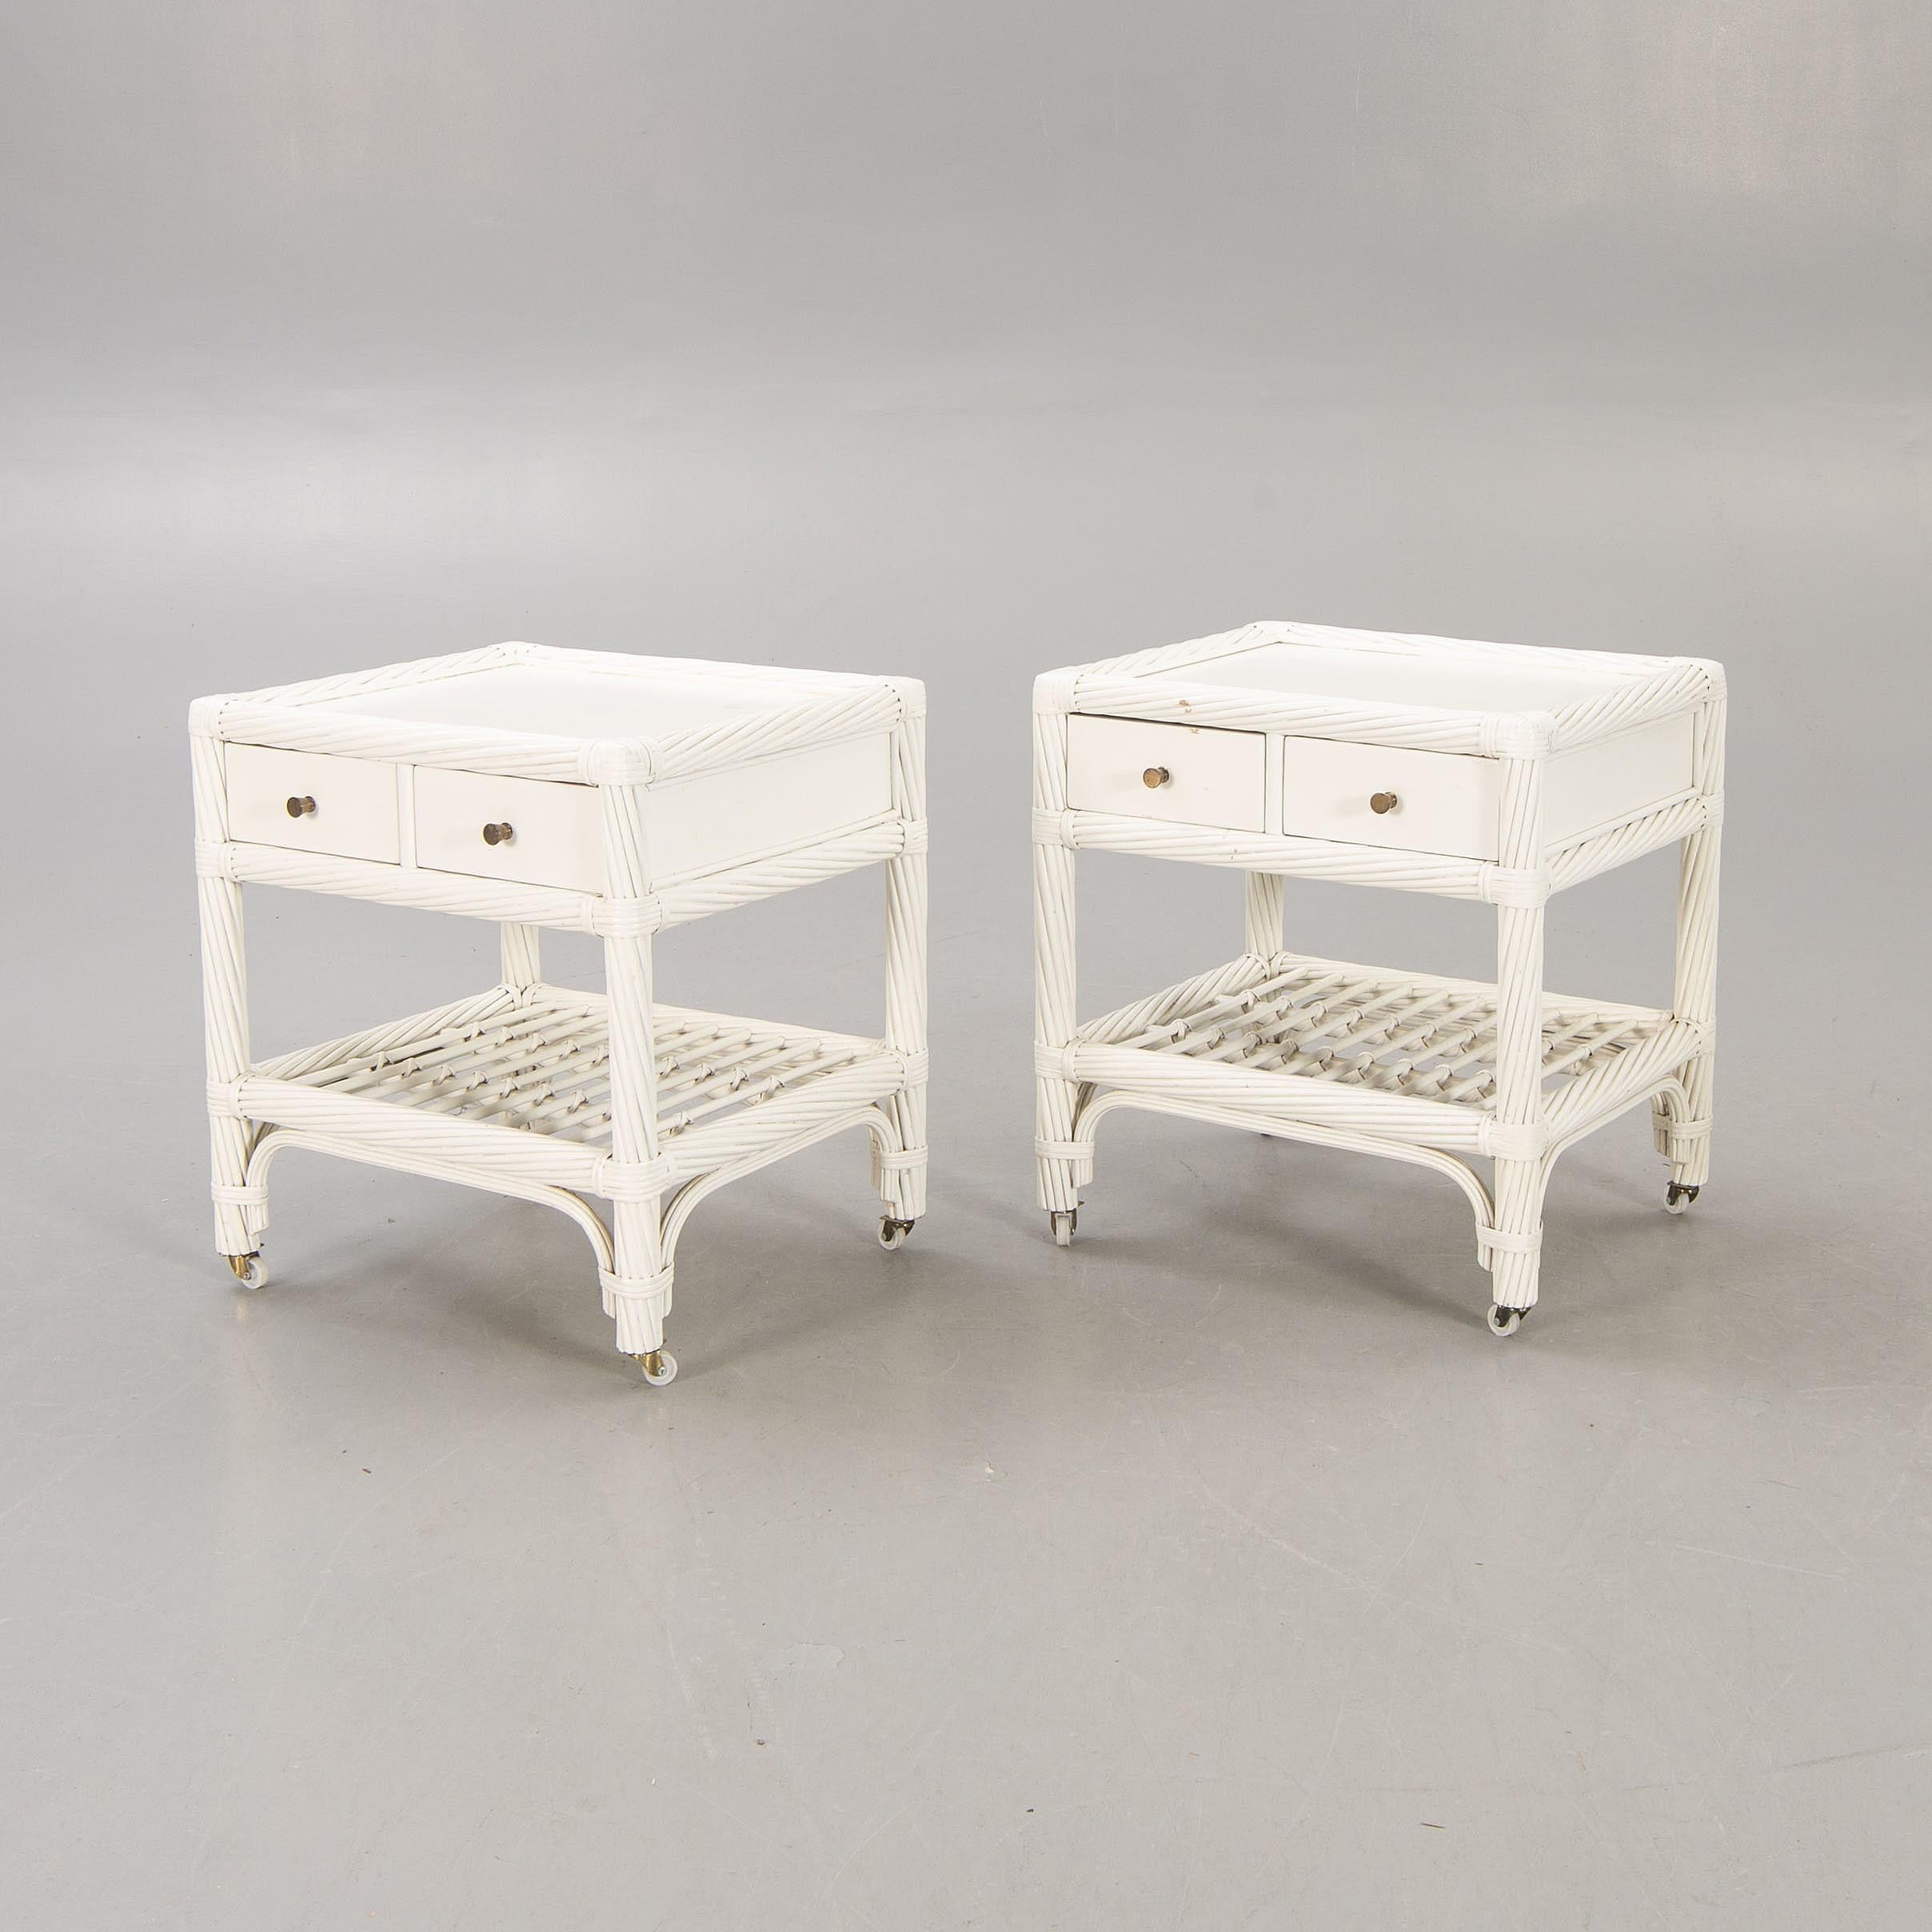 Mid-Century Modern Pair of Nightstand White Lacquer Bamboo and Wood by DUX, Sweden, 1960 For Sale